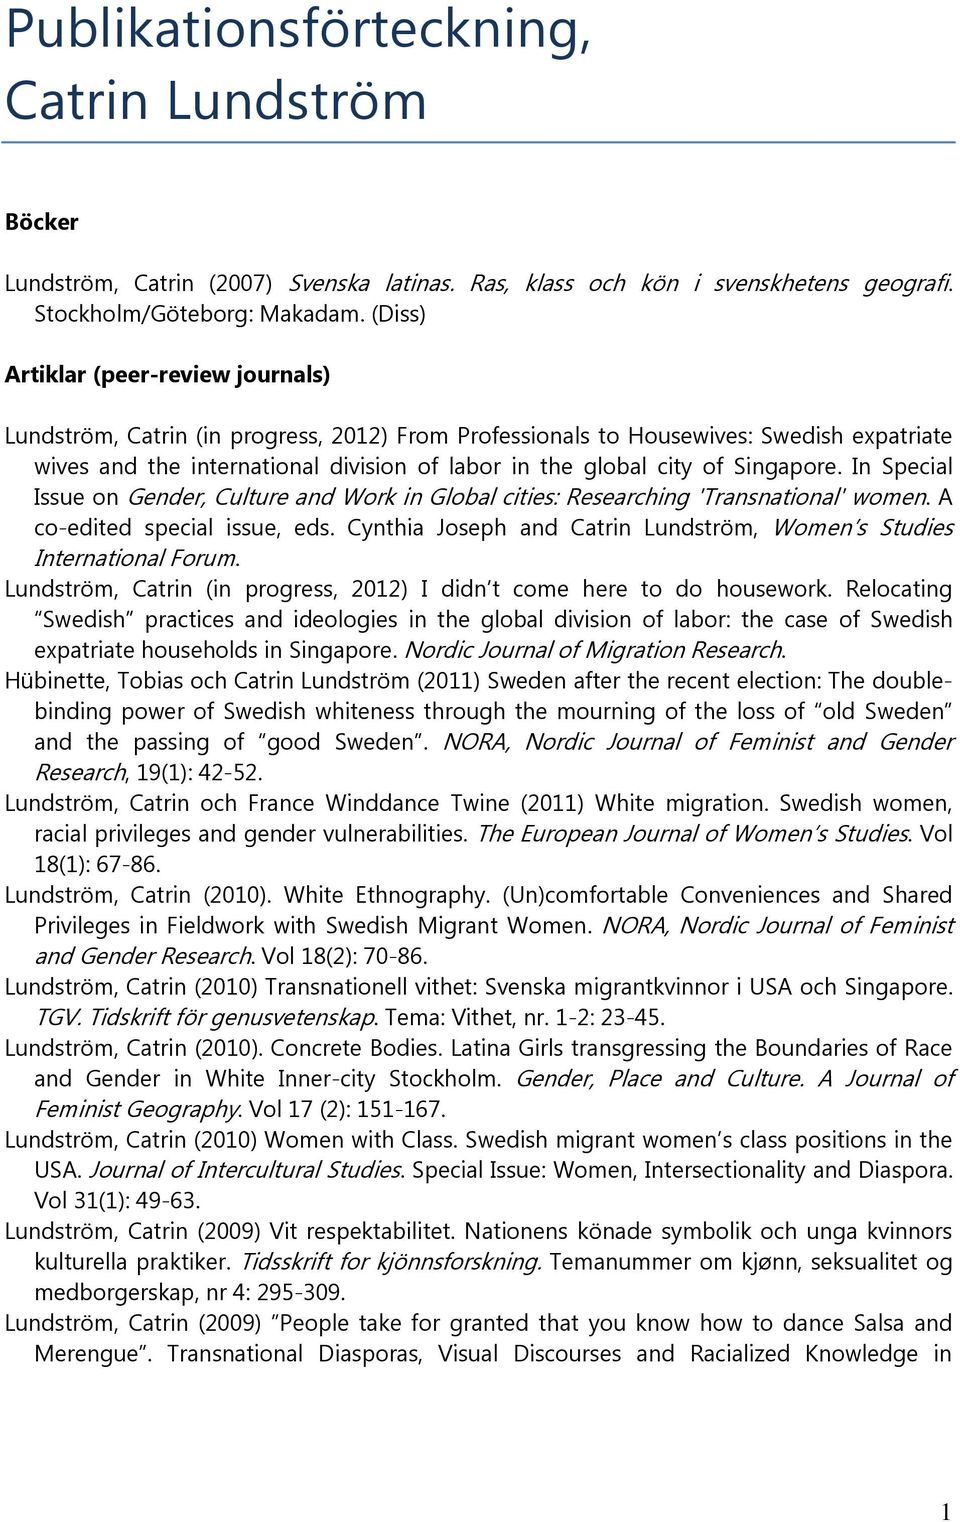 Singapore. In Special Issue on Gender, Culture and Work in Global cities: Researching 'Transnational' women. A co-edited special issue, eds.